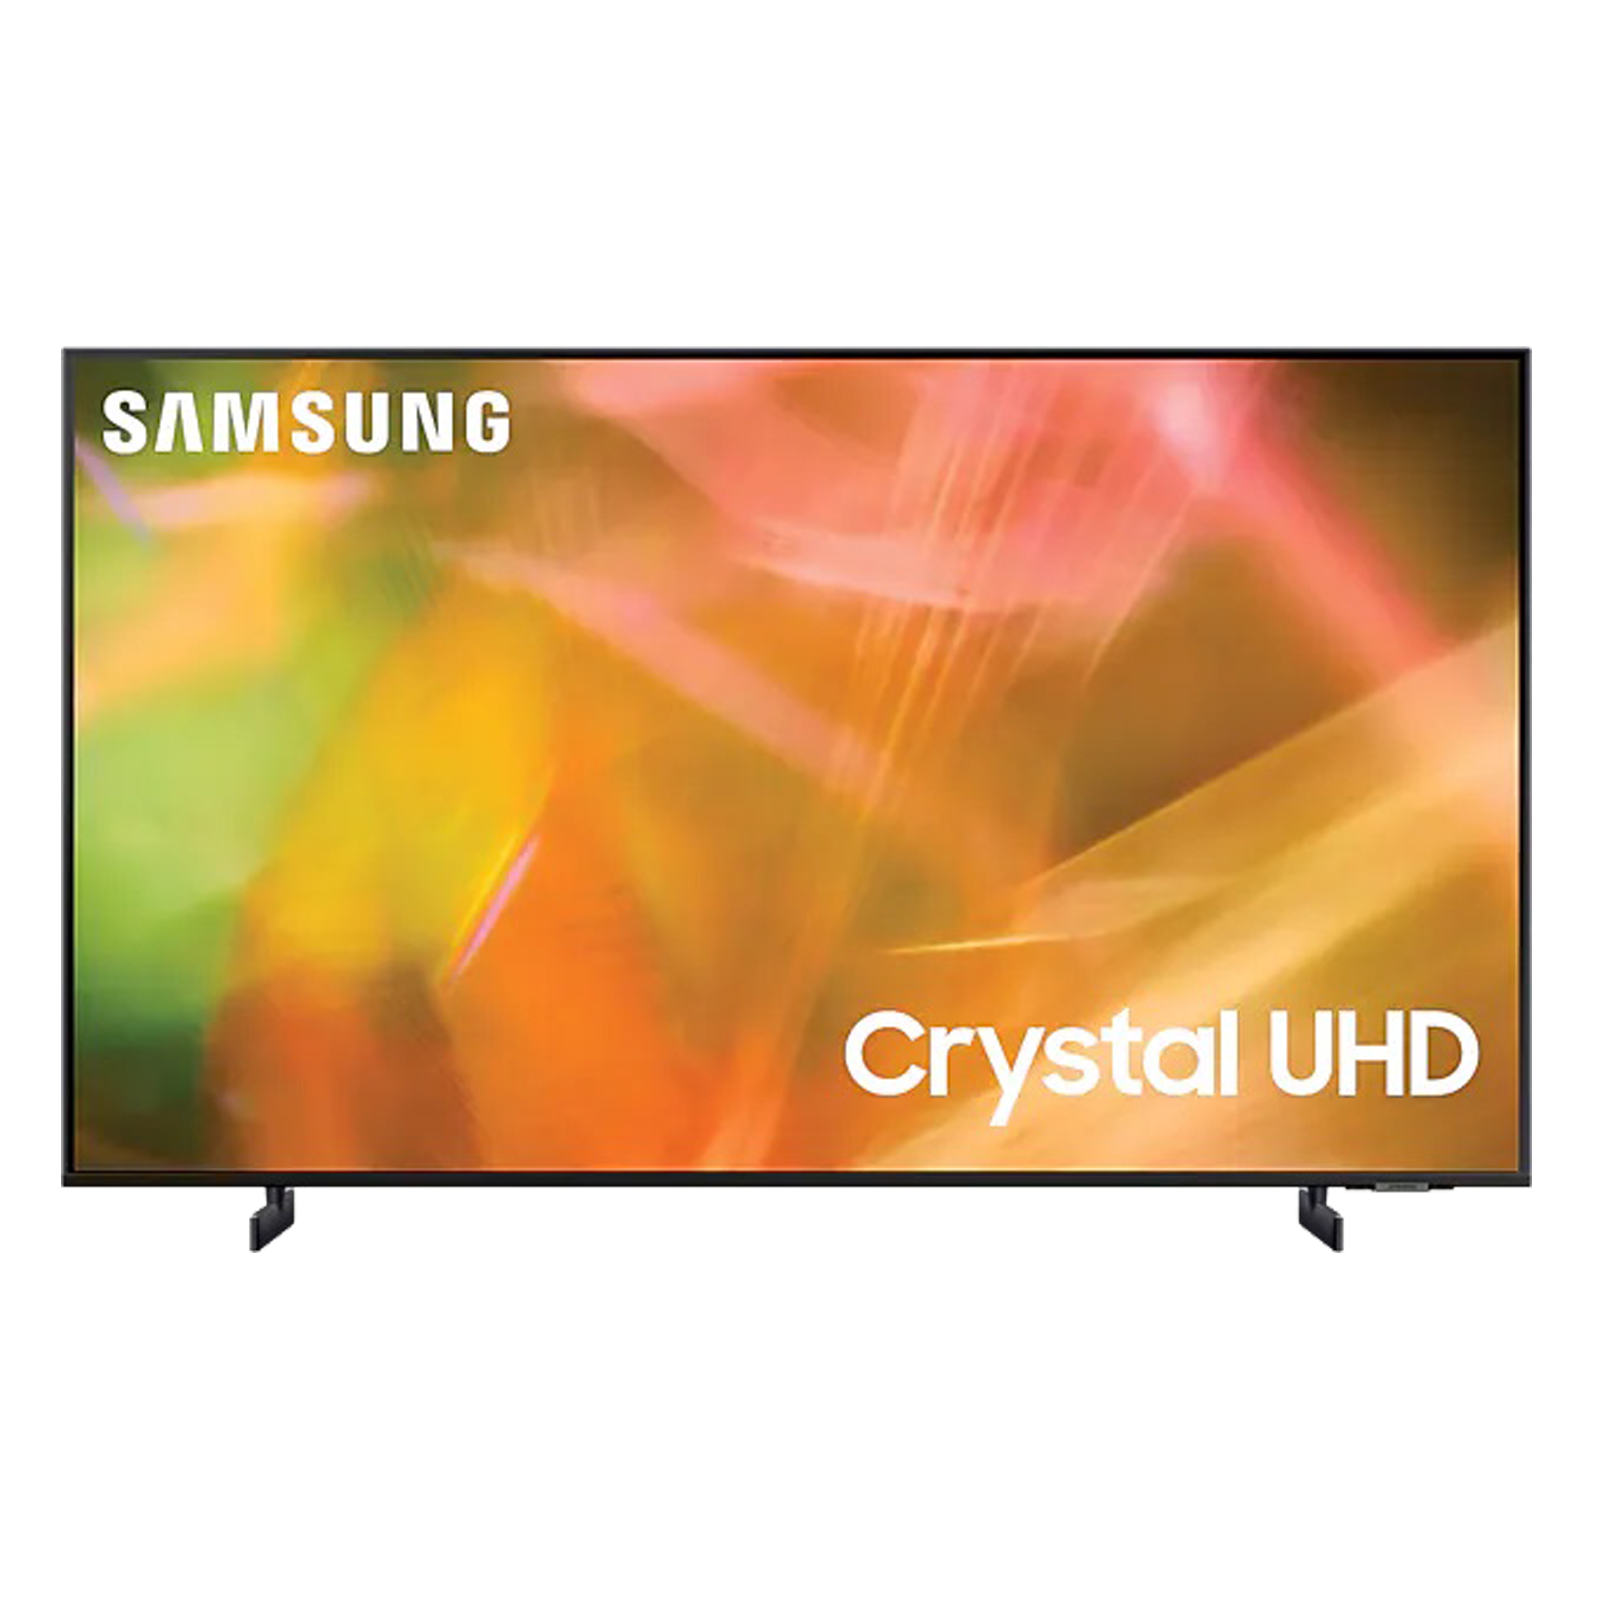 Croma Retail - Samsung 8 Series 163cm (65 Inch) Ultra HD 4K LED Smart TV (Multi Voice Assistant Supported, UA65AU8200KLXL, Titan Grey)